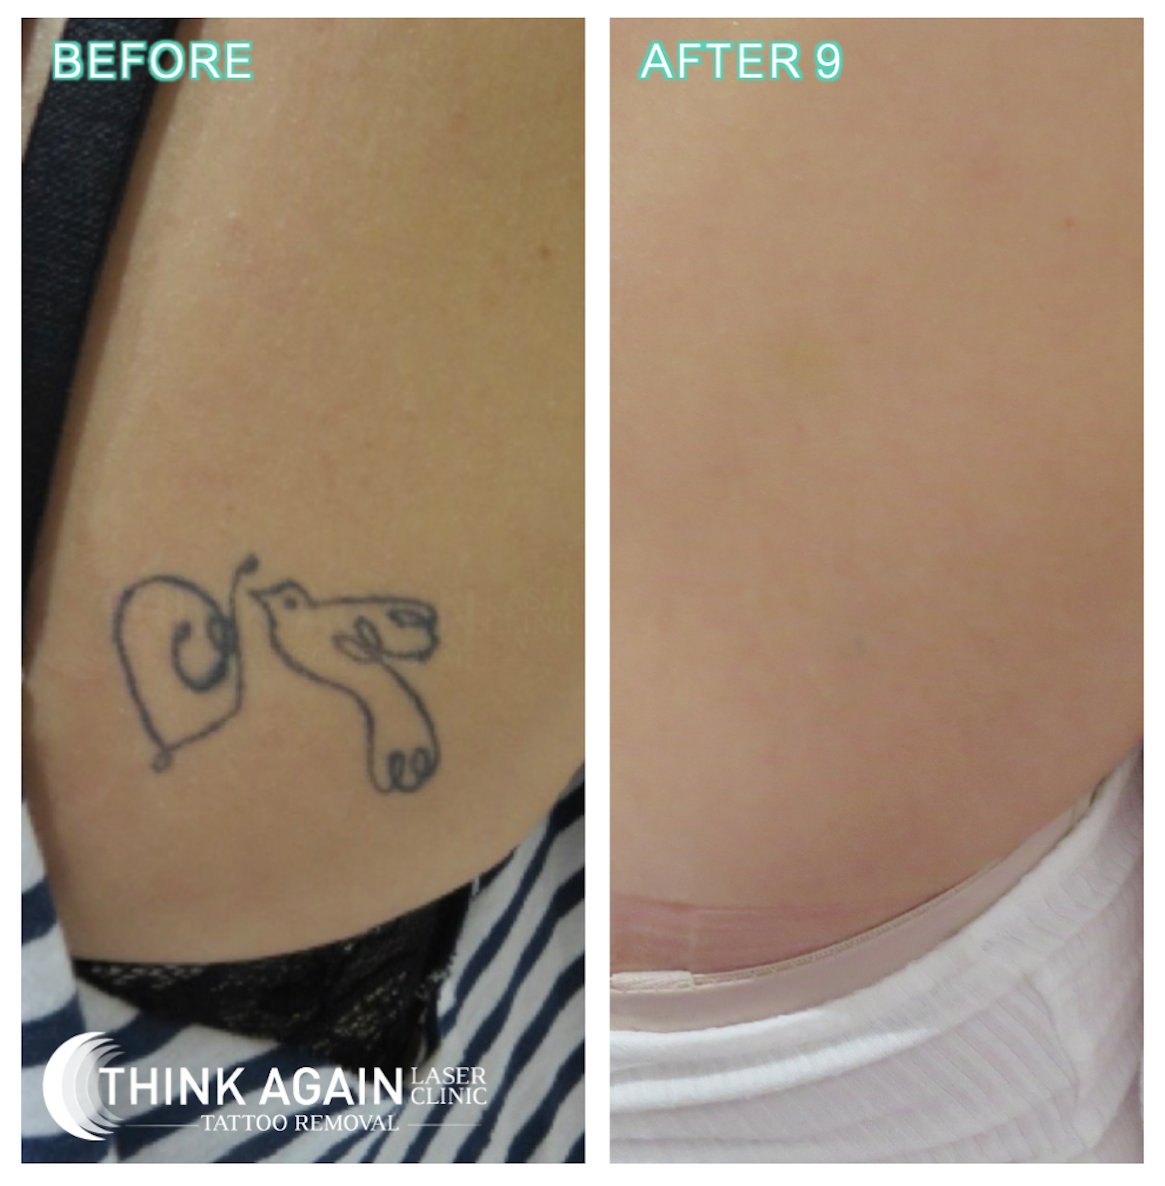 How Can A Healthy Lifestyle Speed Up Your Tattoo Removal?